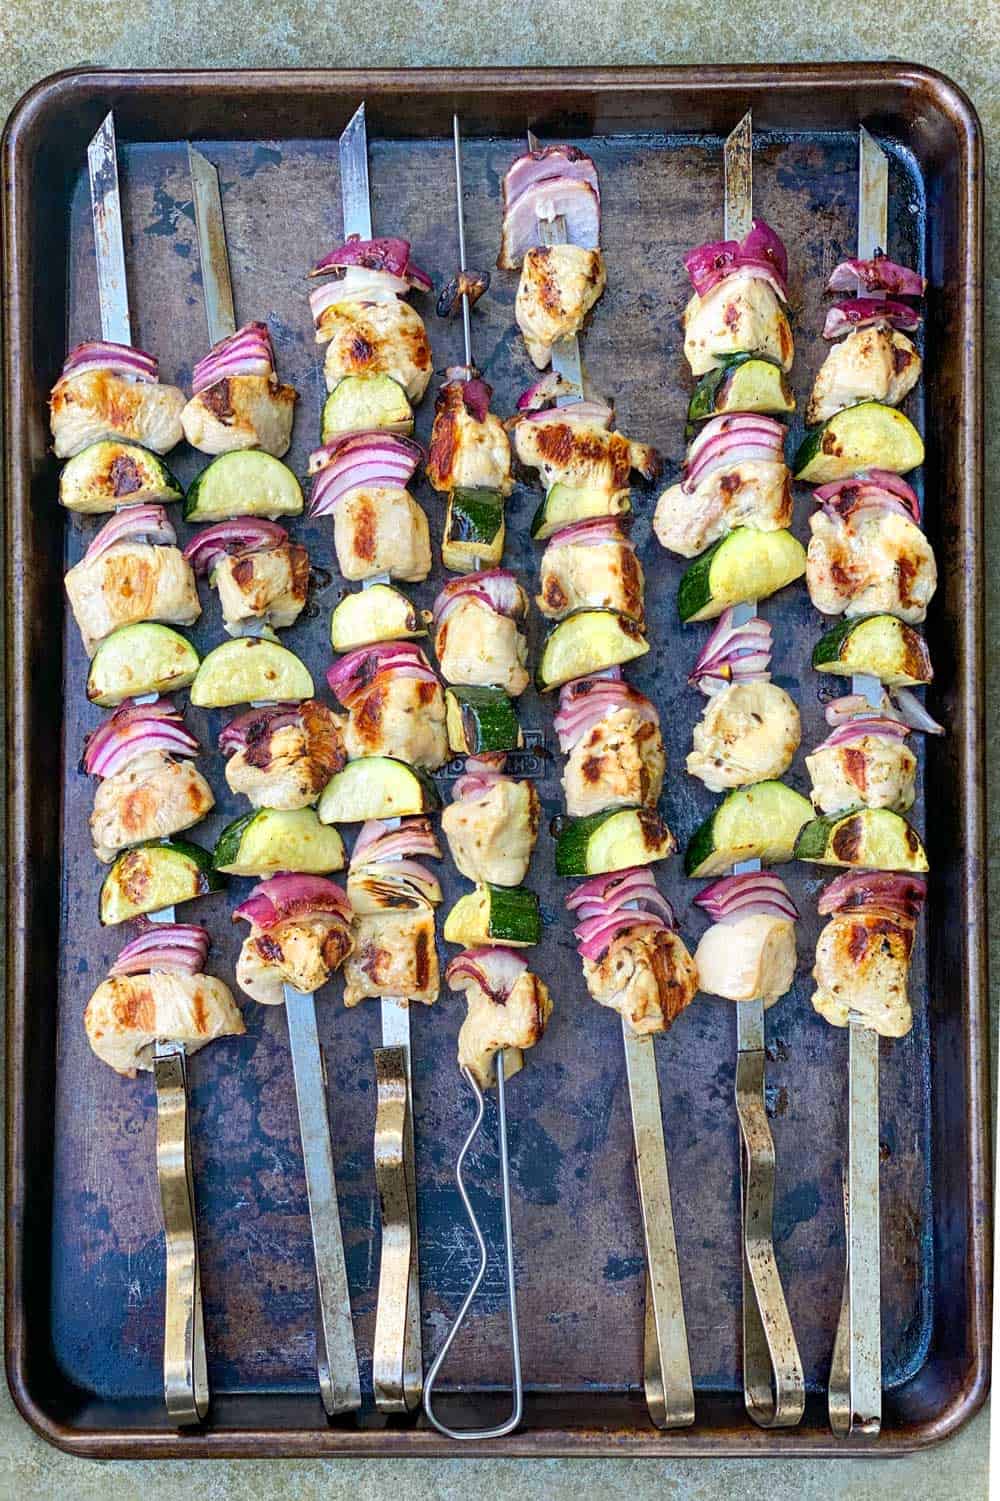 7 grilled skewers of chicken souvlaki with zucchini and red onions